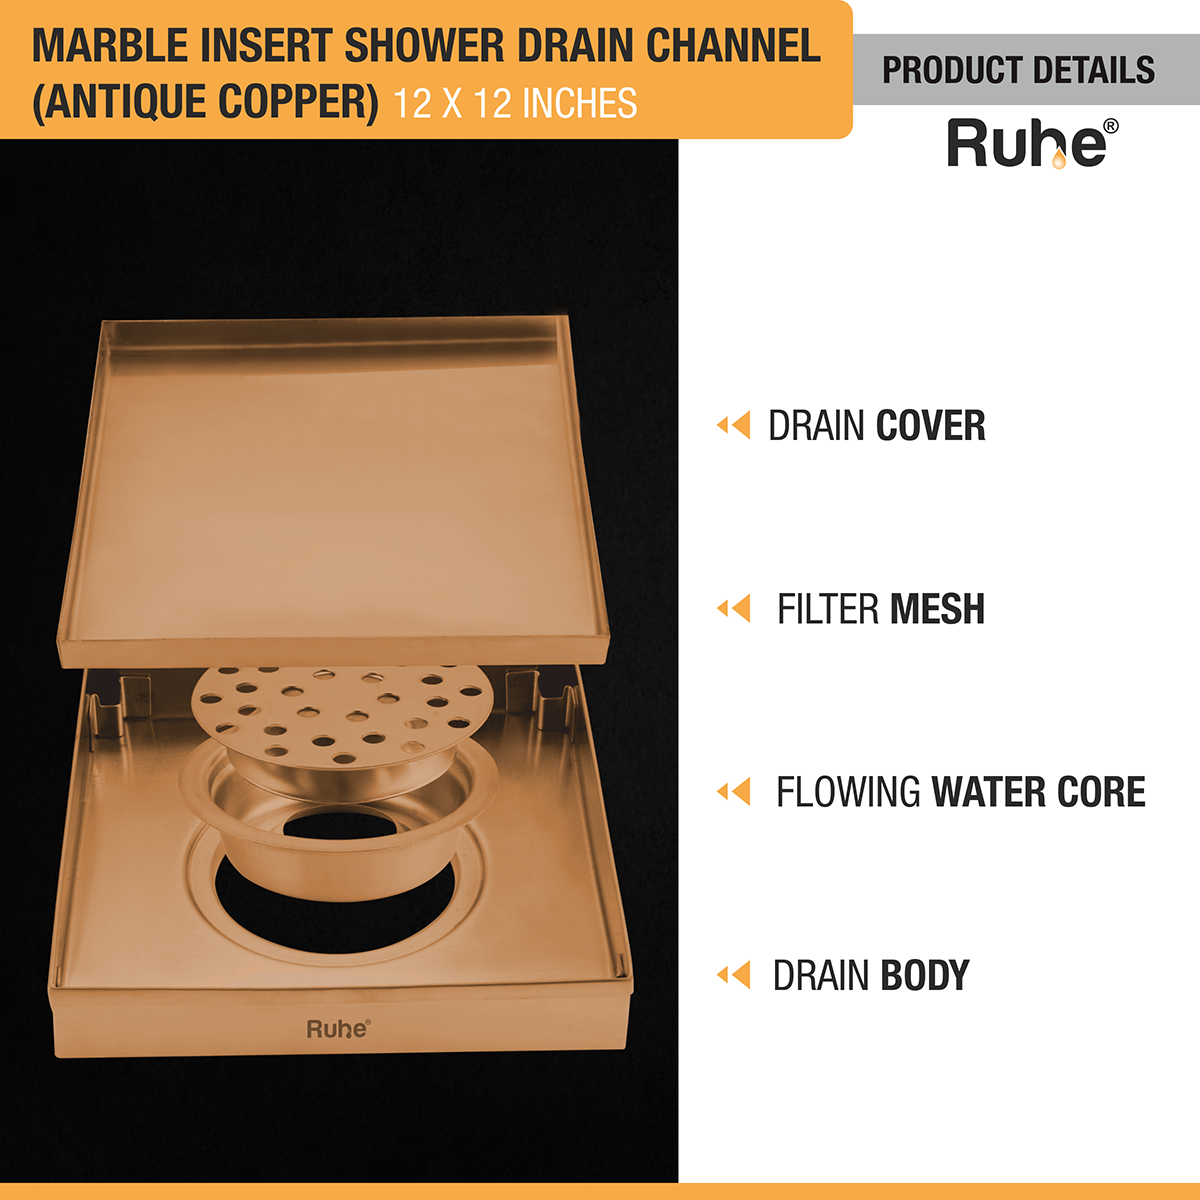 Marble Insert Shower Drain Channel (12 x 12 Inches) ROSE GOLD/ ANTIQUE COPPER product details